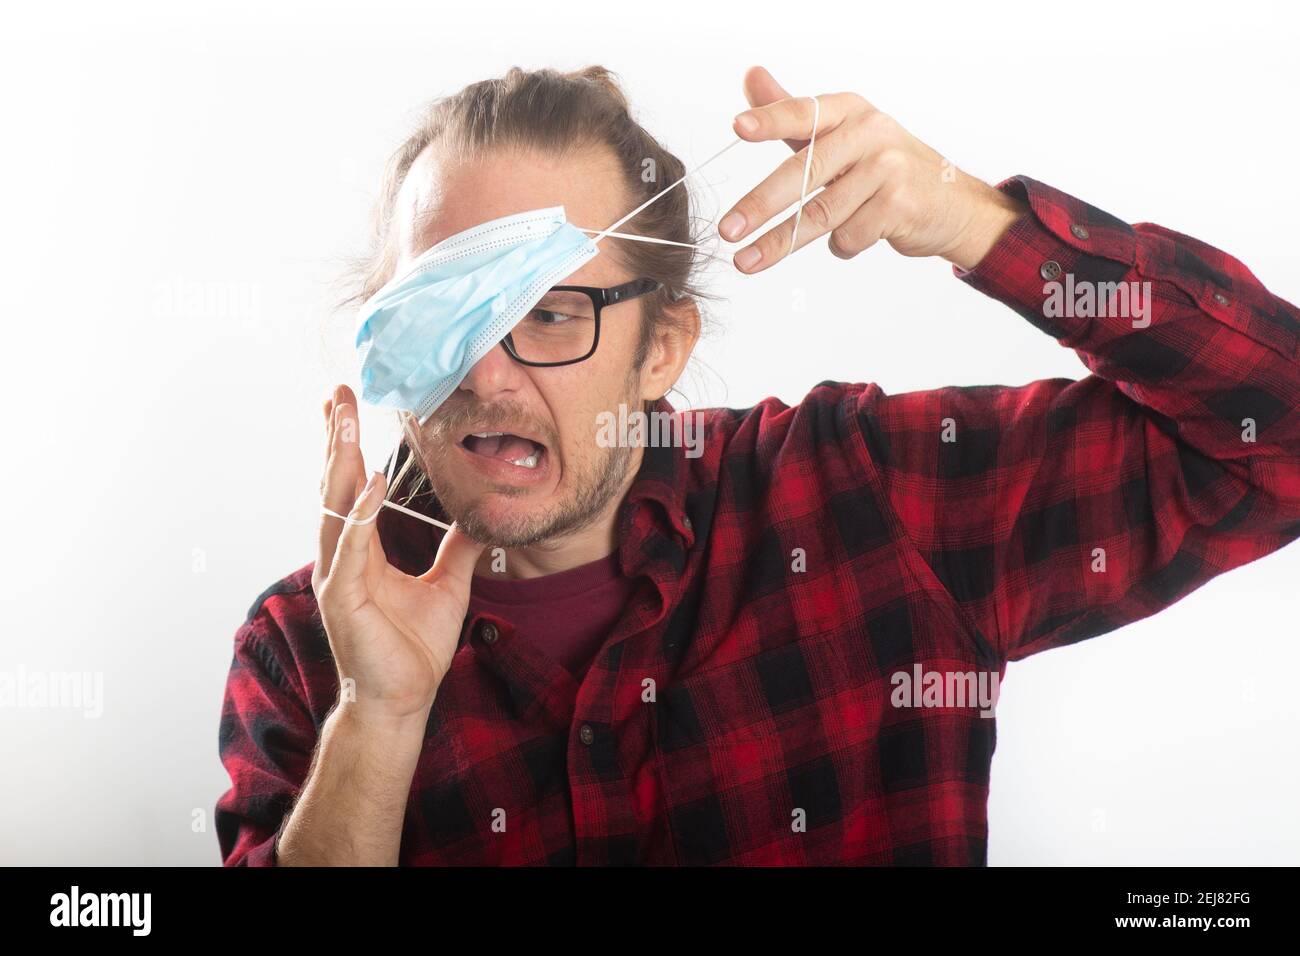 Portrait of man having trouble wearing a protective mask Stock Photo